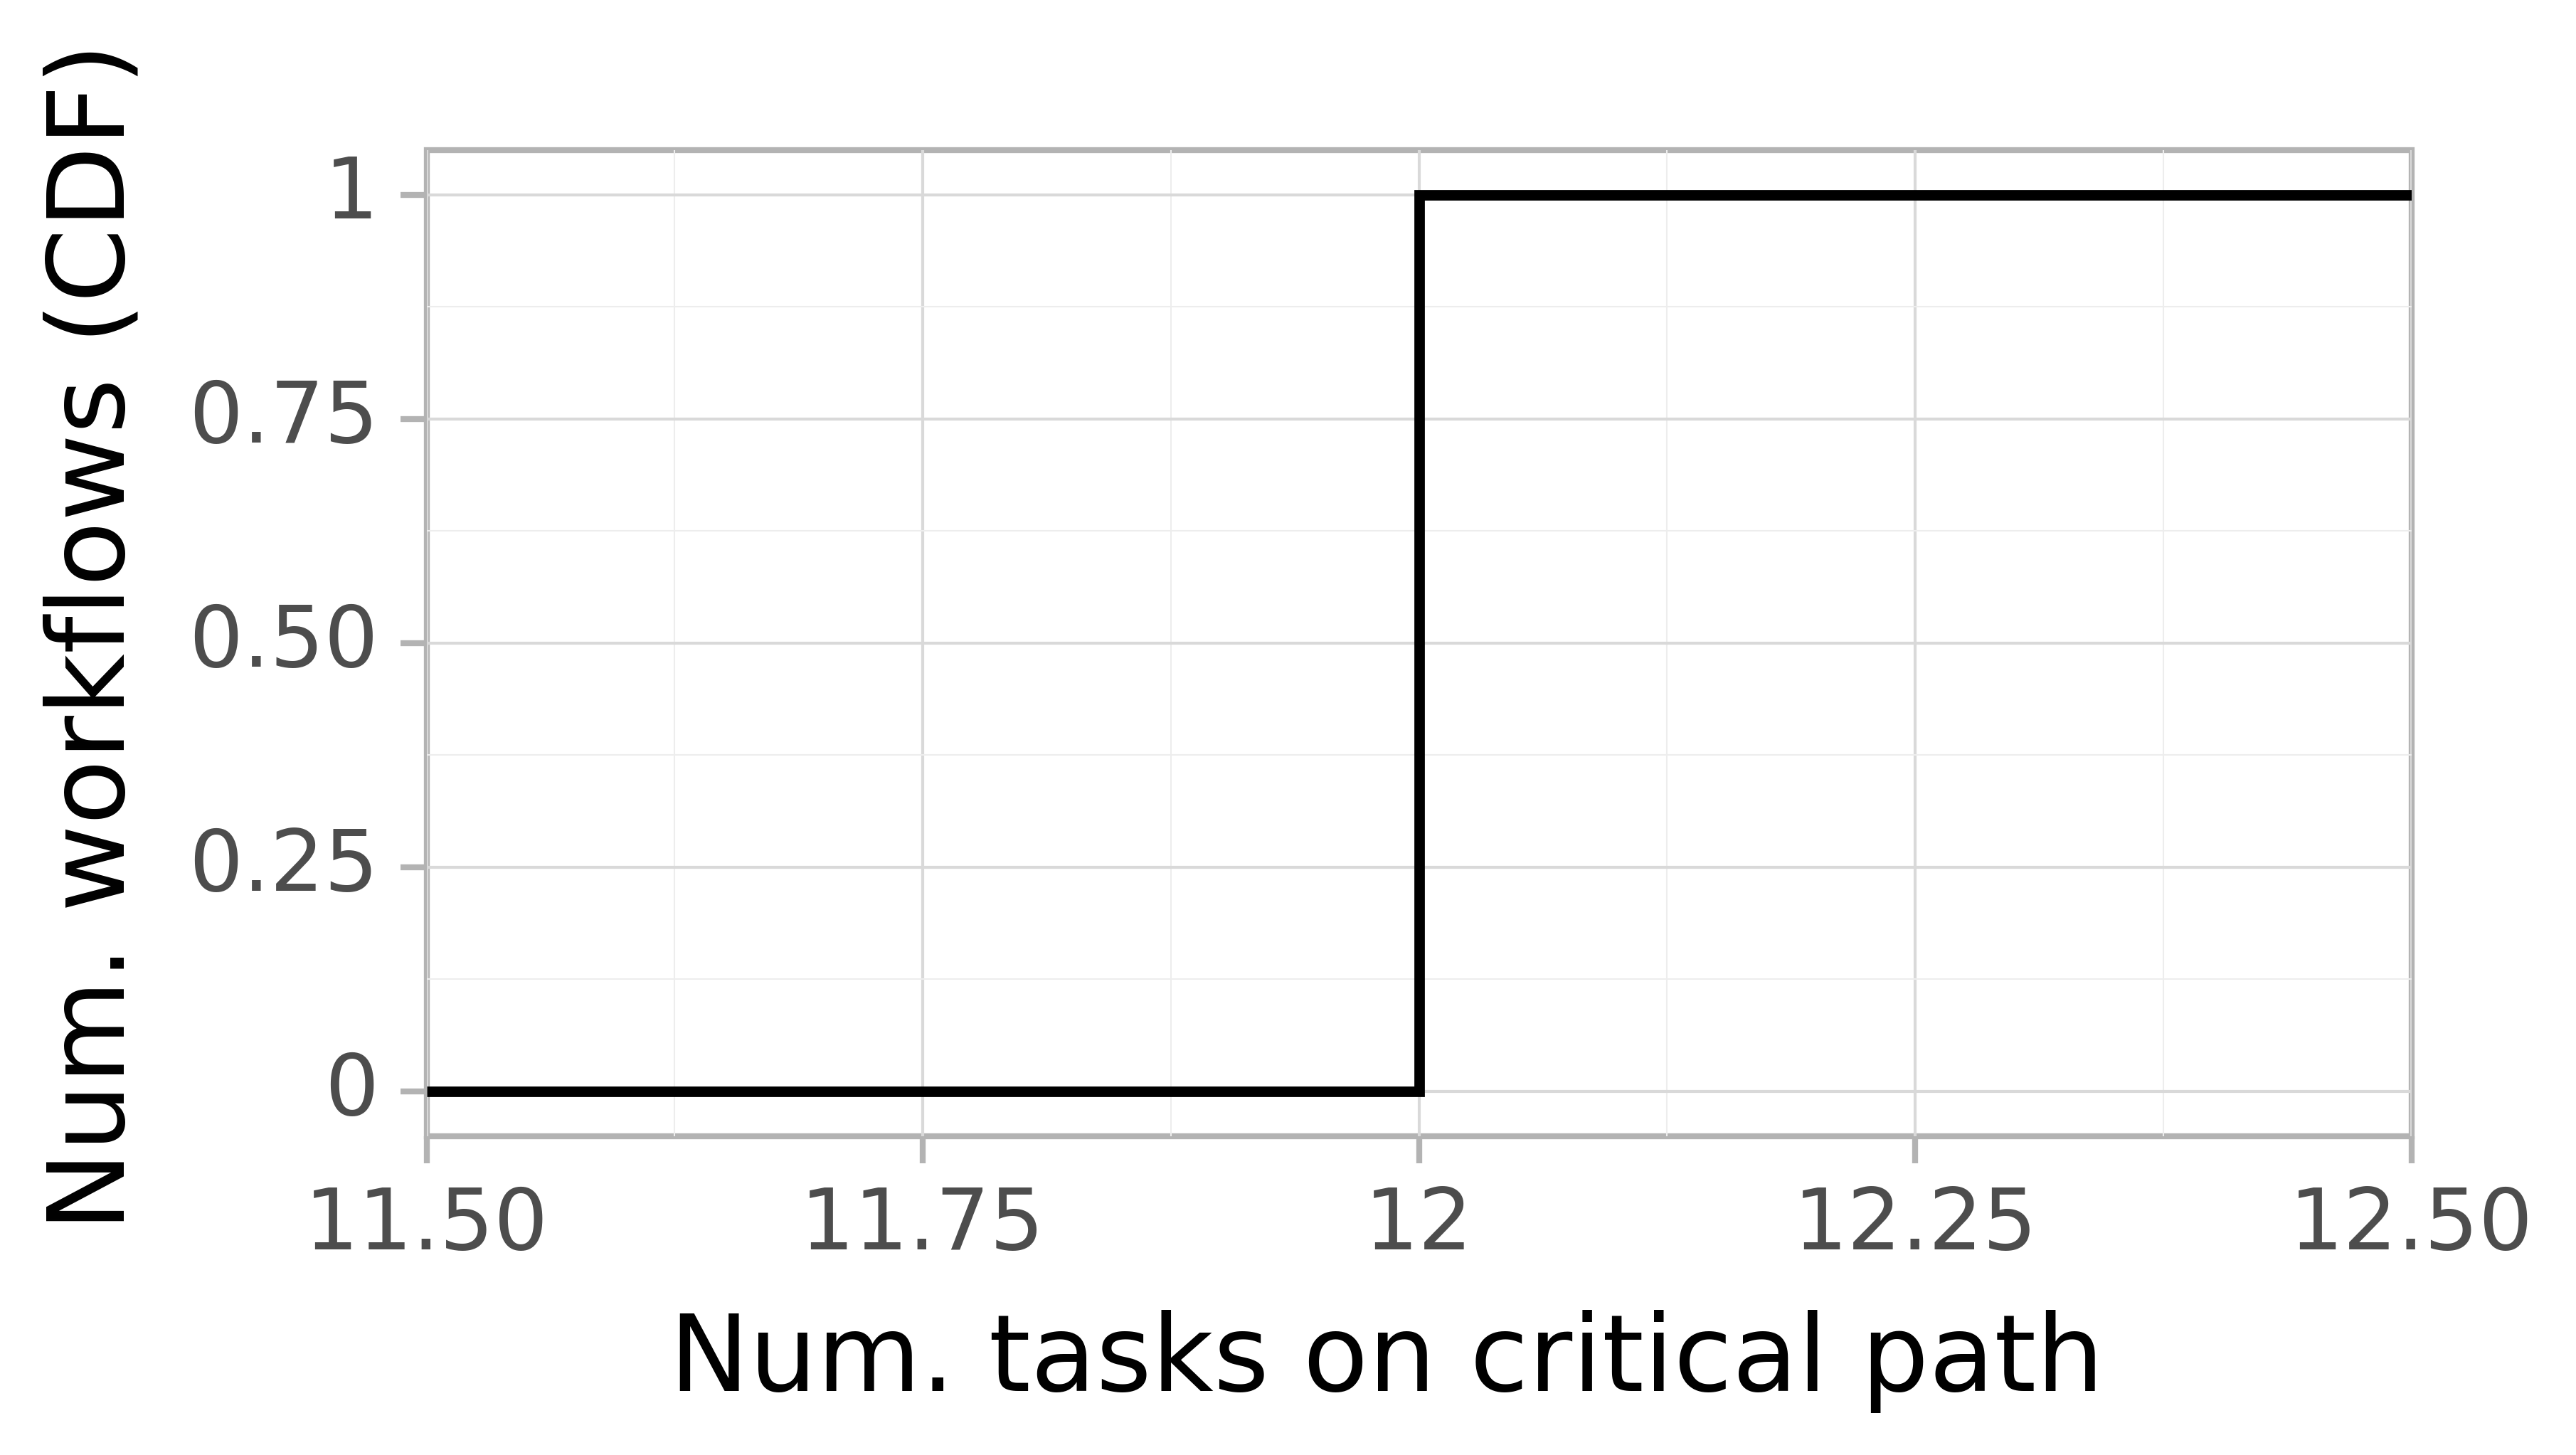 Job critical path task count graph for the workflowhub_montage_dataset-02_degree-2-0_osg_schema-0-2_montage-2-0-osg-run007 trace.